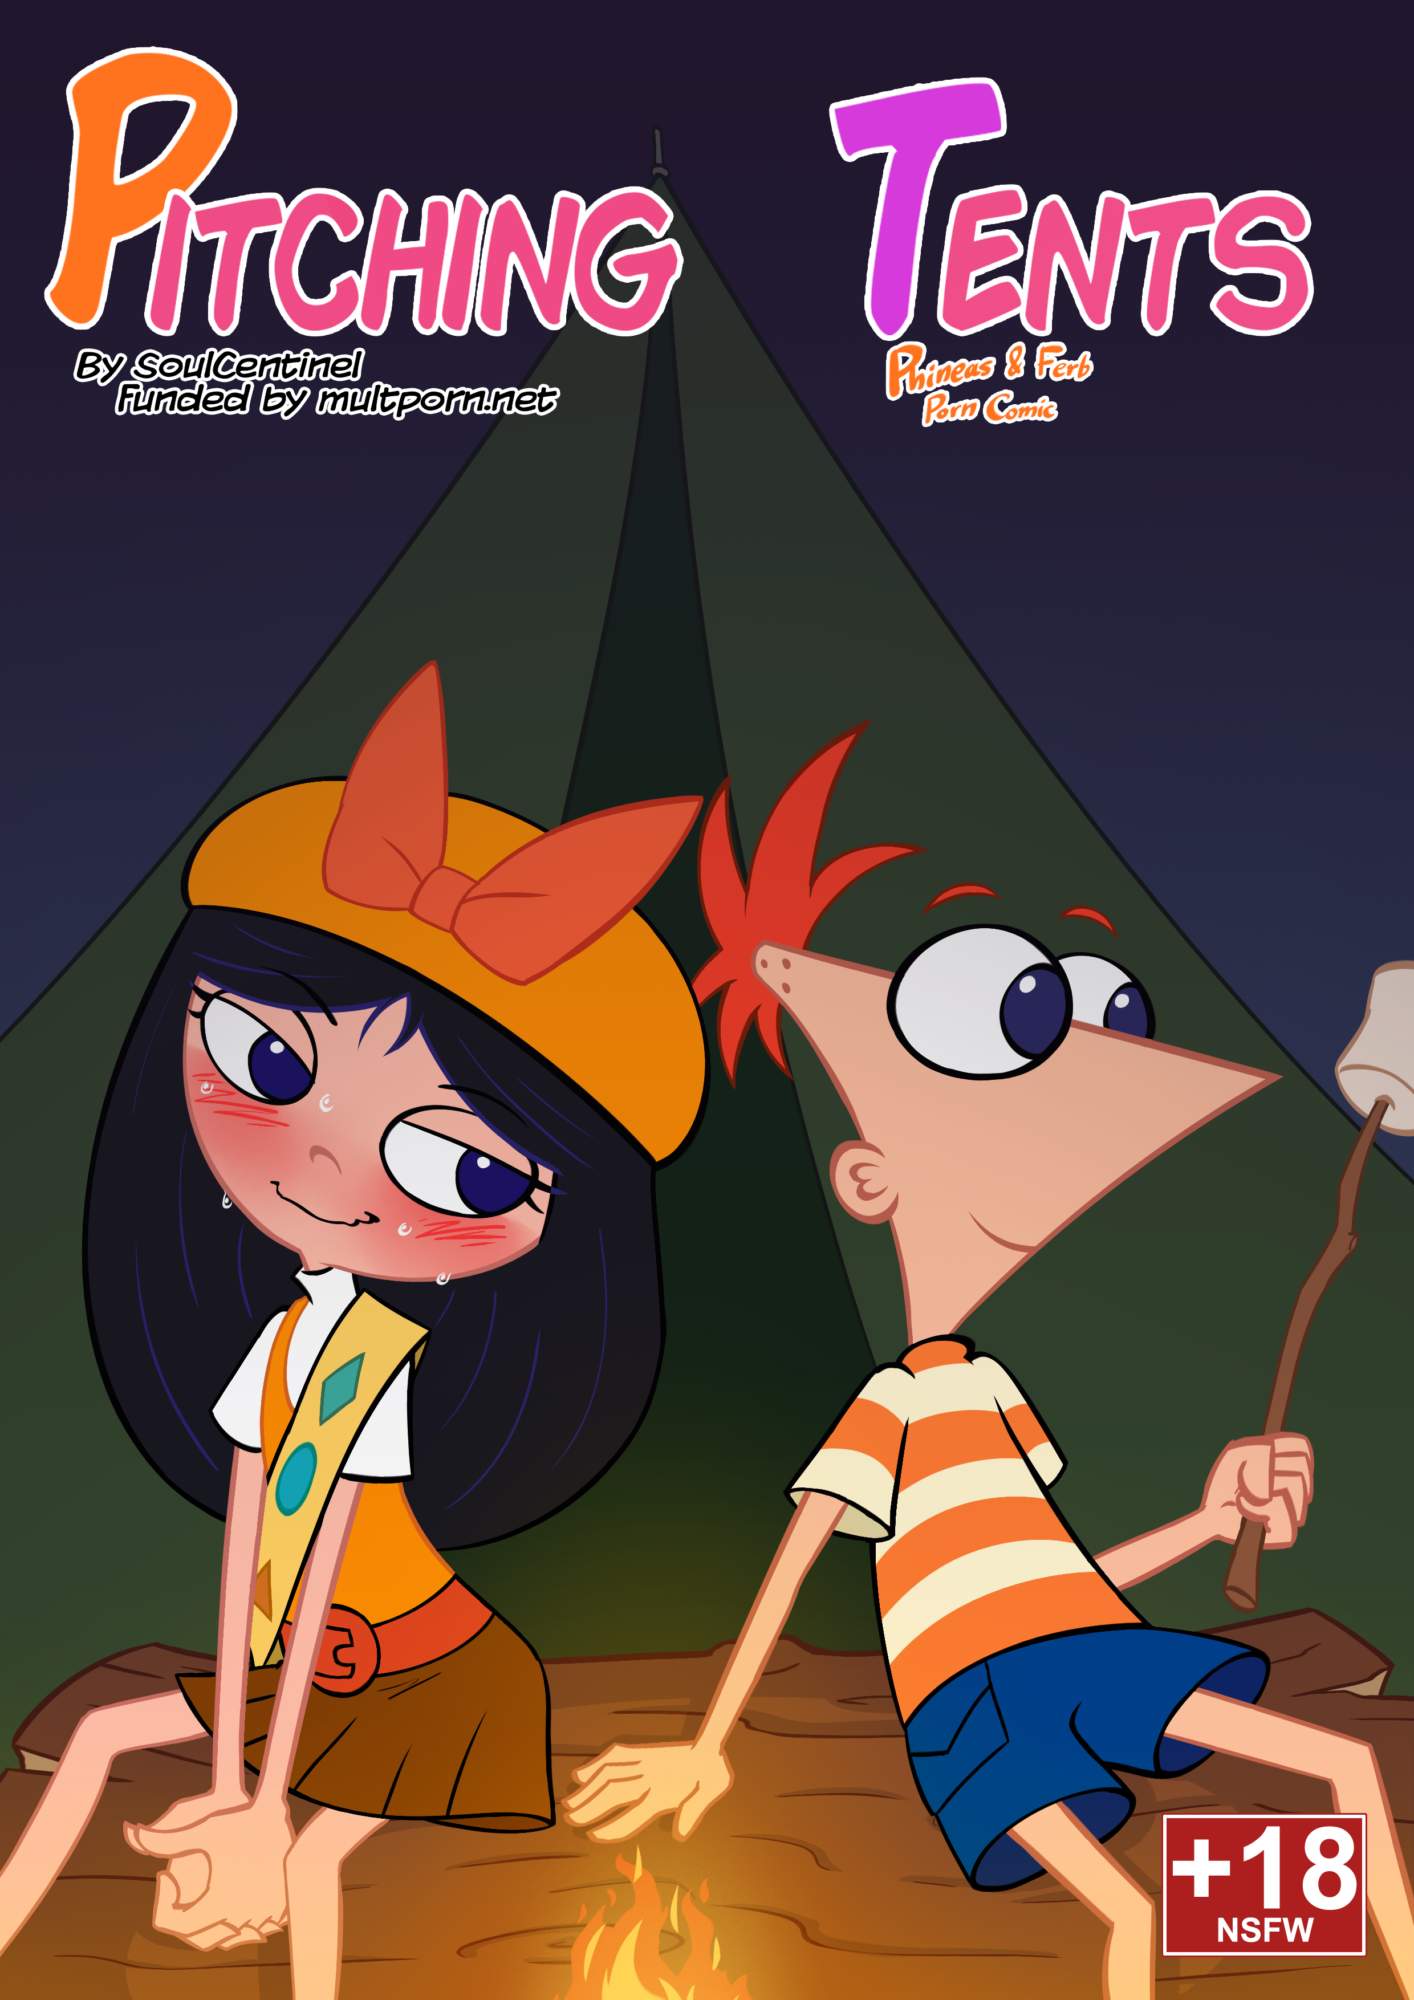 SureFap xxx porno Phineas And Ferb - [Soulcentinel][VioletEchoes] - Pitching Tents